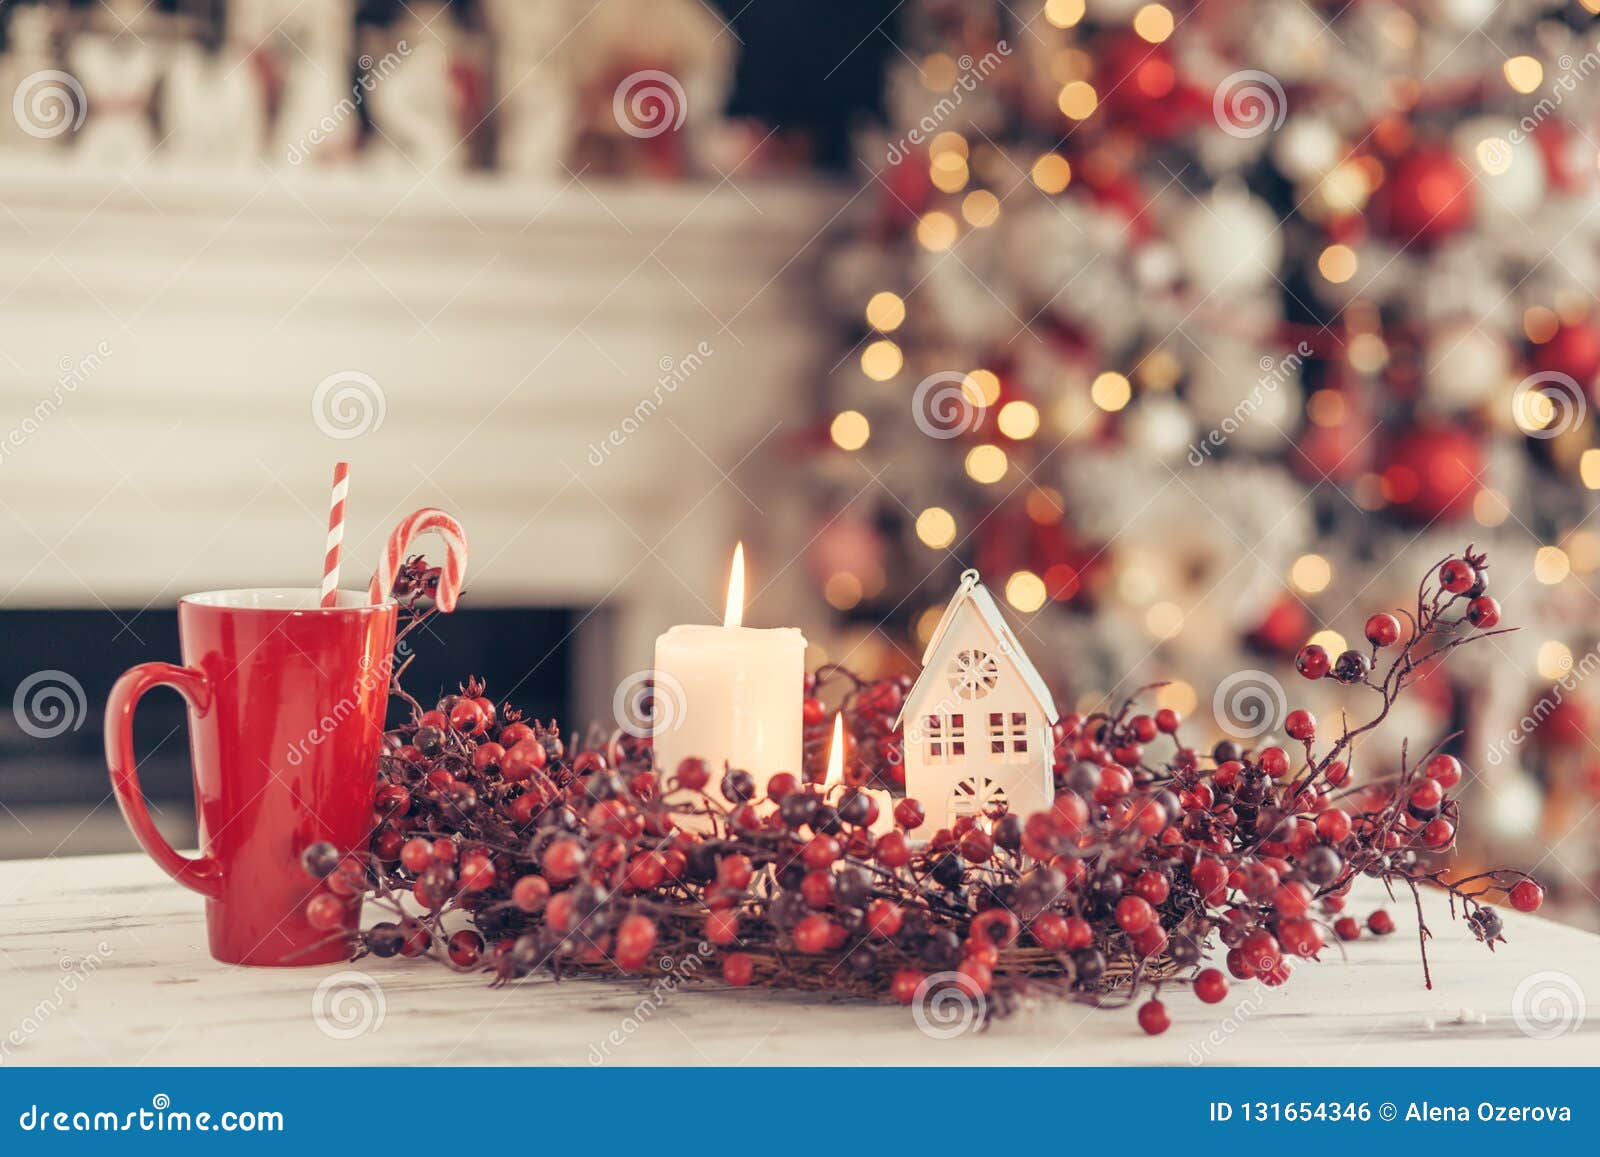 Christmas Decoration on a Table Over Blurred Lights Stock Photo - Image ...